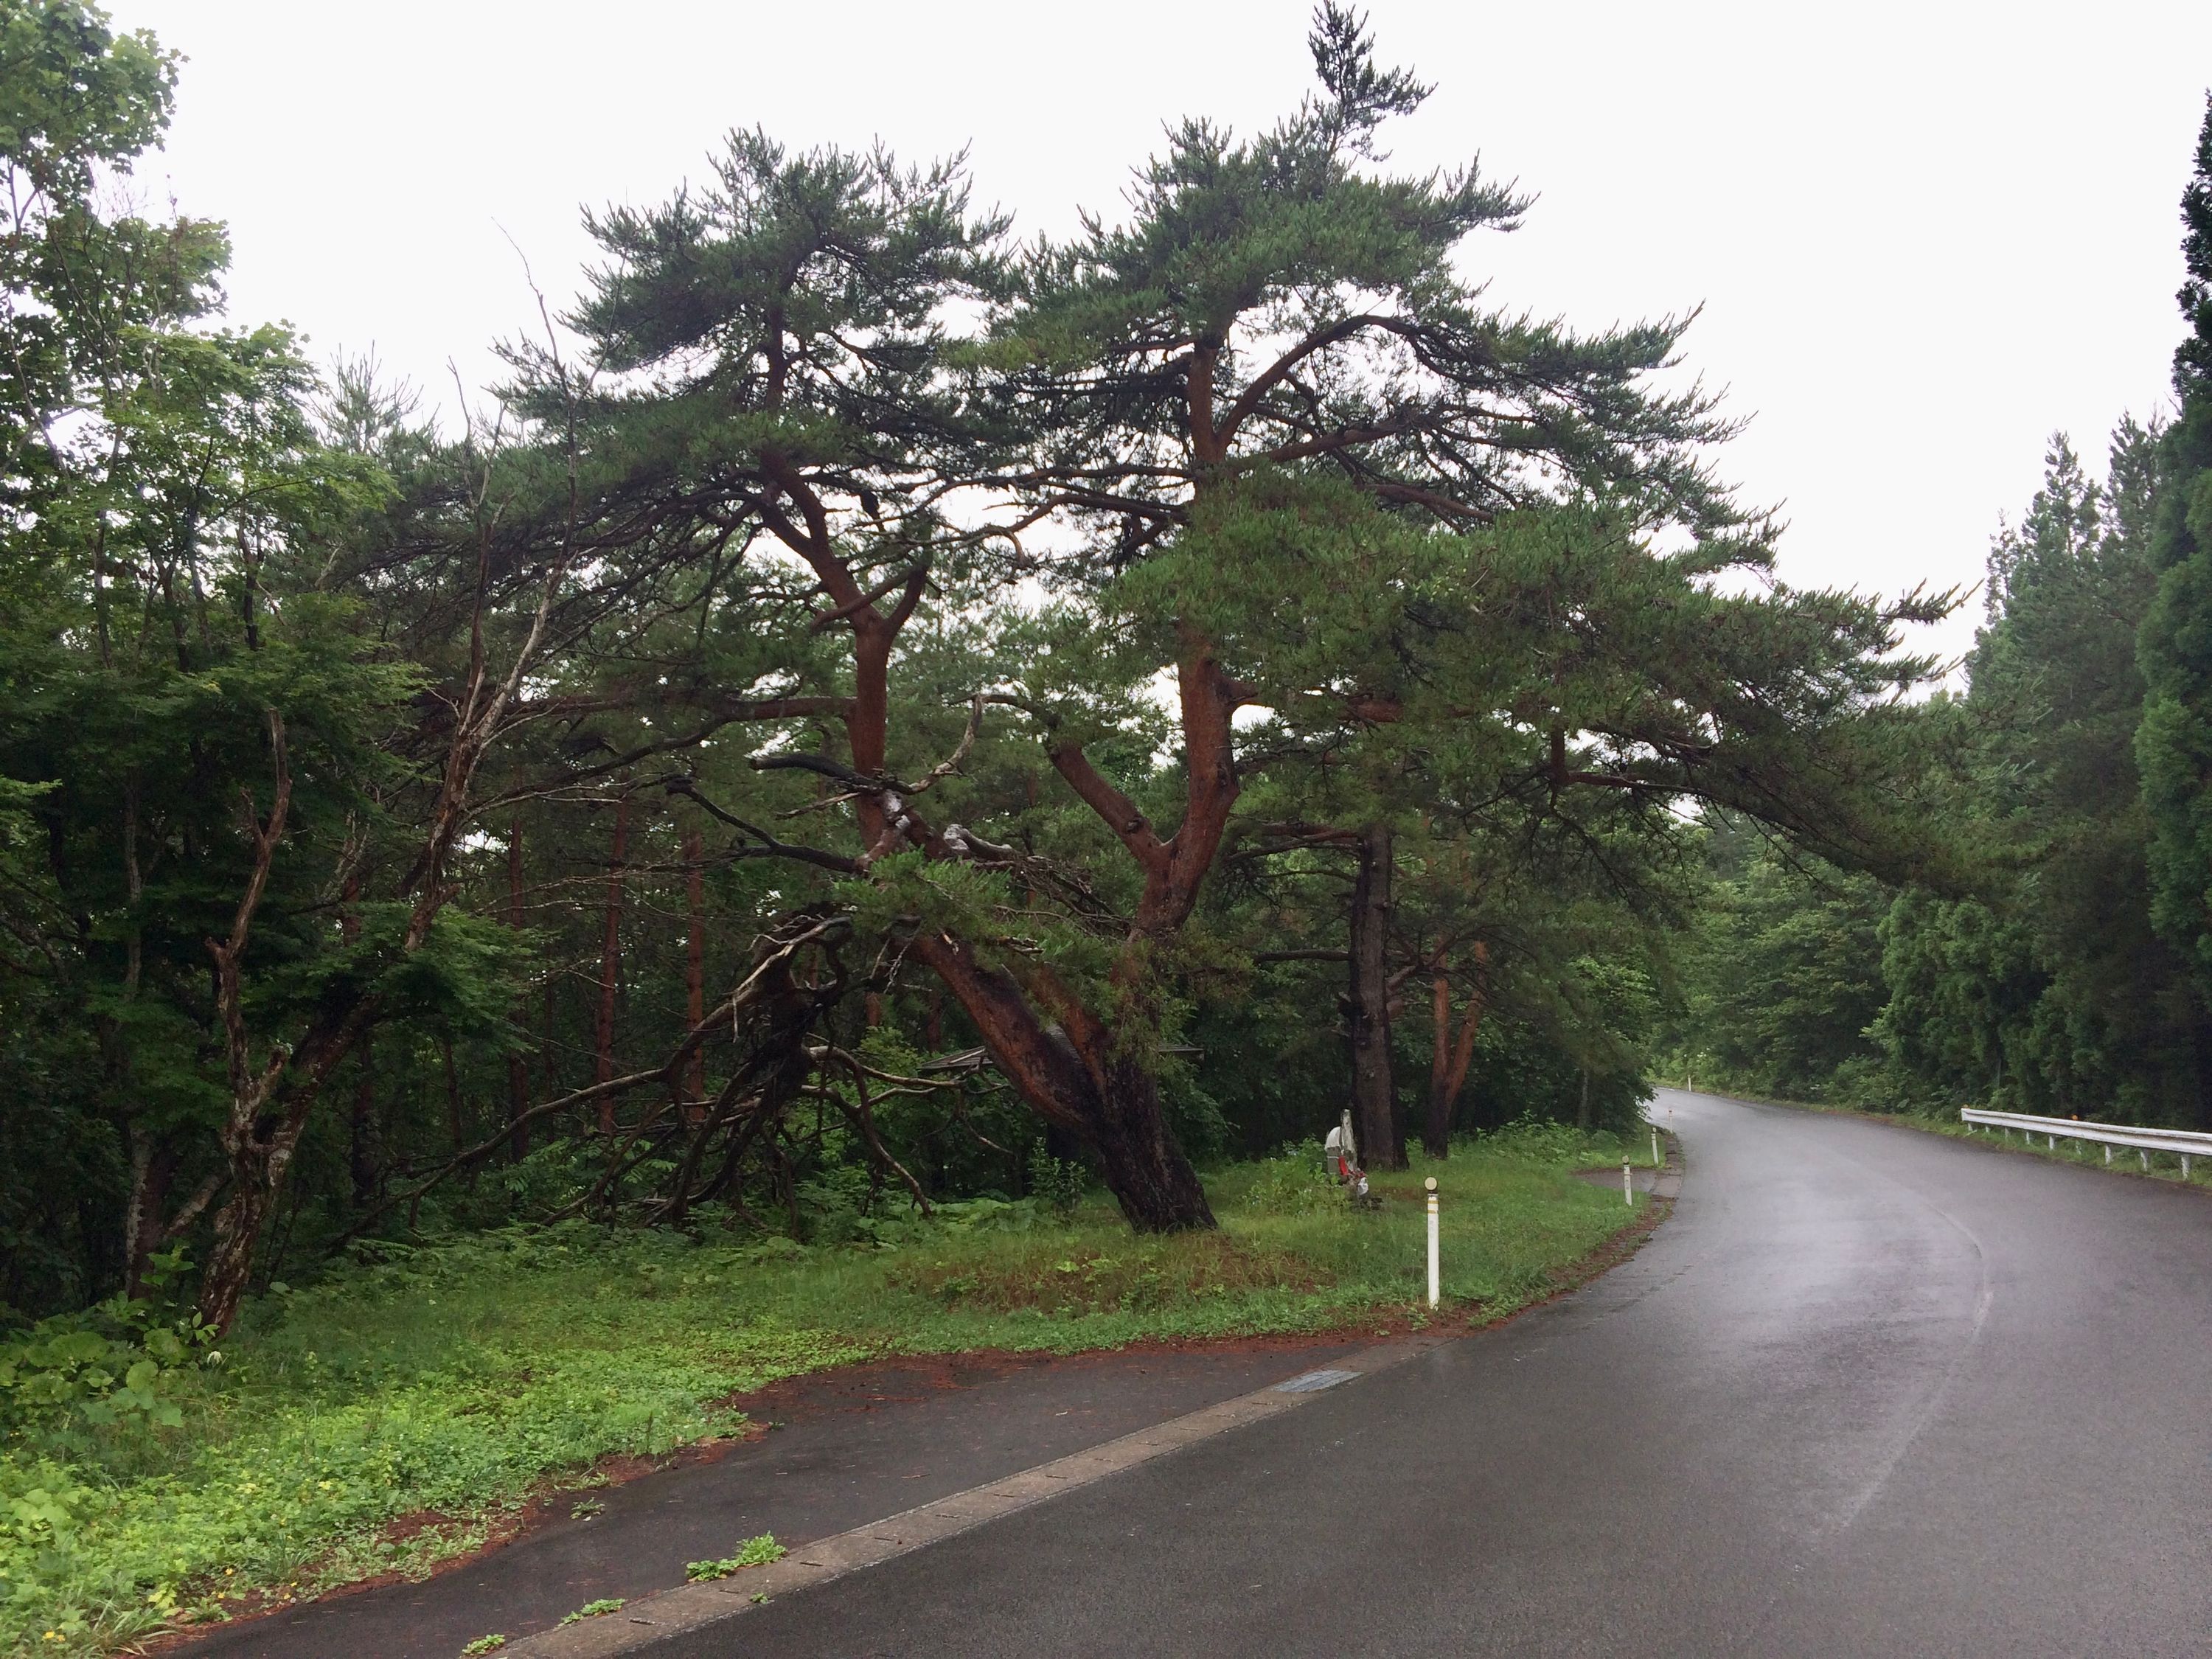 A large, gnarly cedar stands by the road.